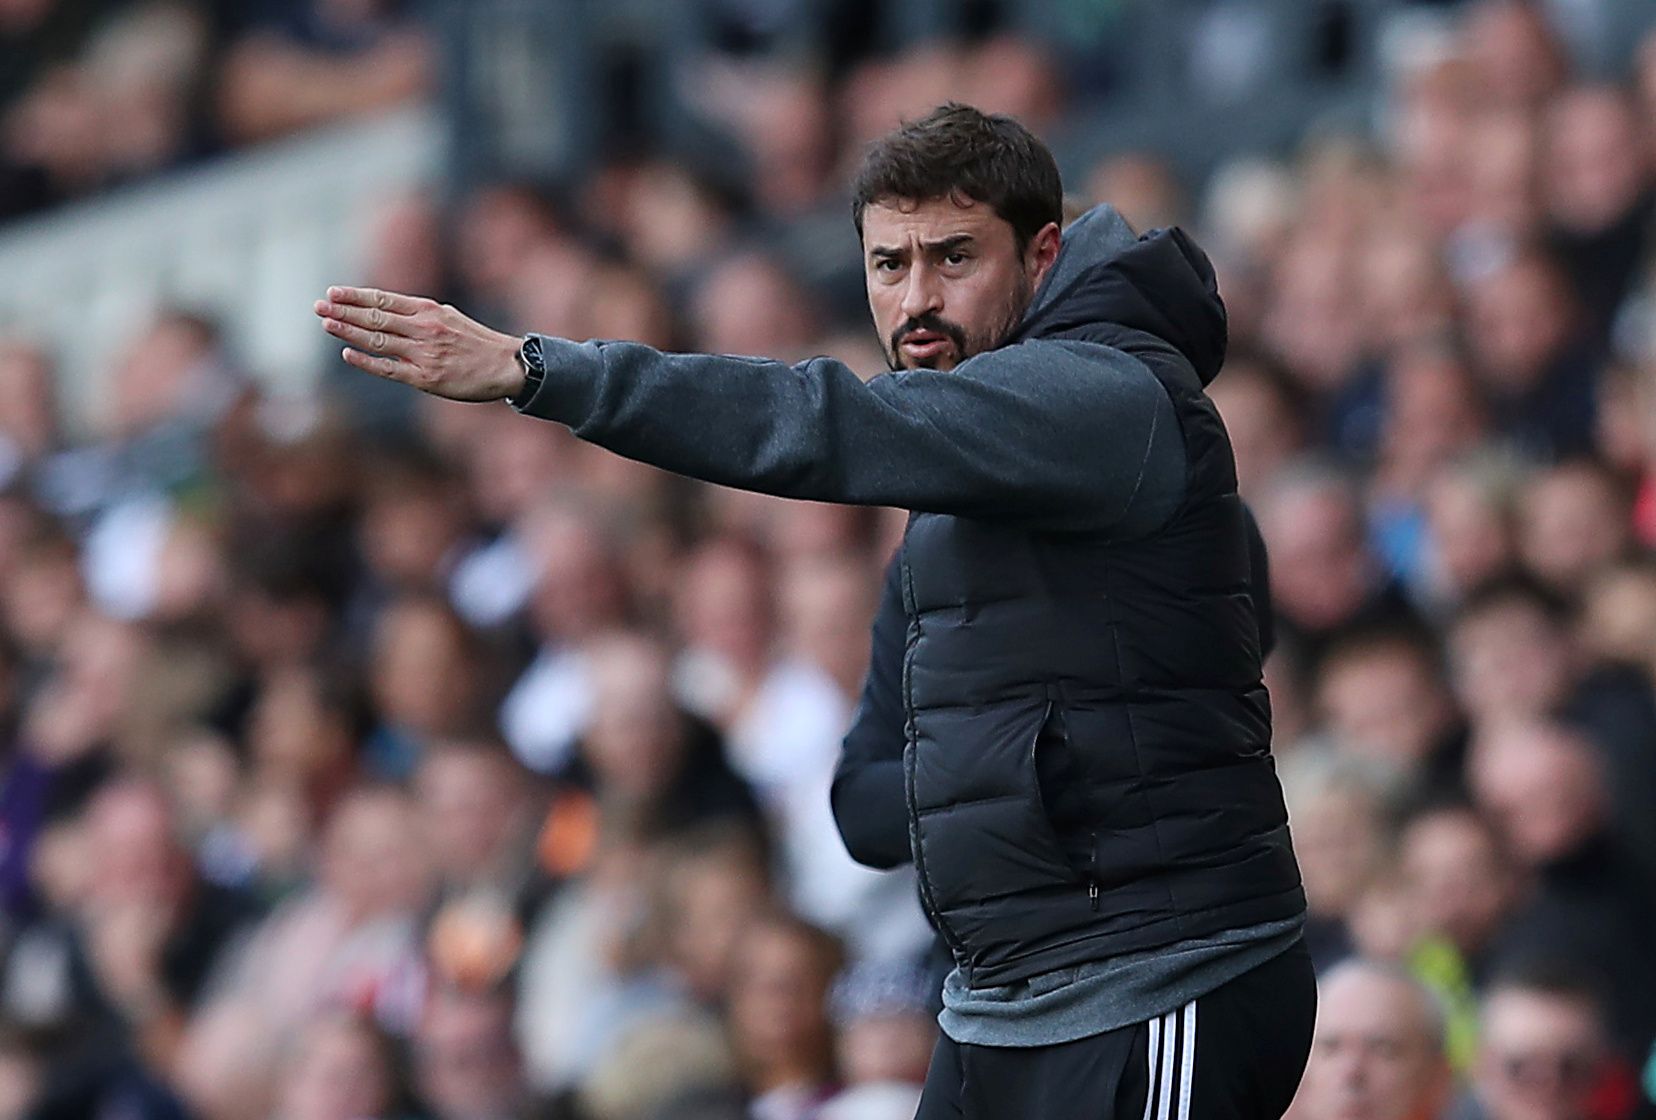 Soccer Football - Championship - Derby County v Birmingham City - Pride Park, Derby, Britain - September 28, 2019   Birmingham City manager Pep Clotet reacts   Action Images/John Clifton    EDITORIAL USE ONLY. No use with unauthorized audio, video, data, fixture lists, club/league logos or 